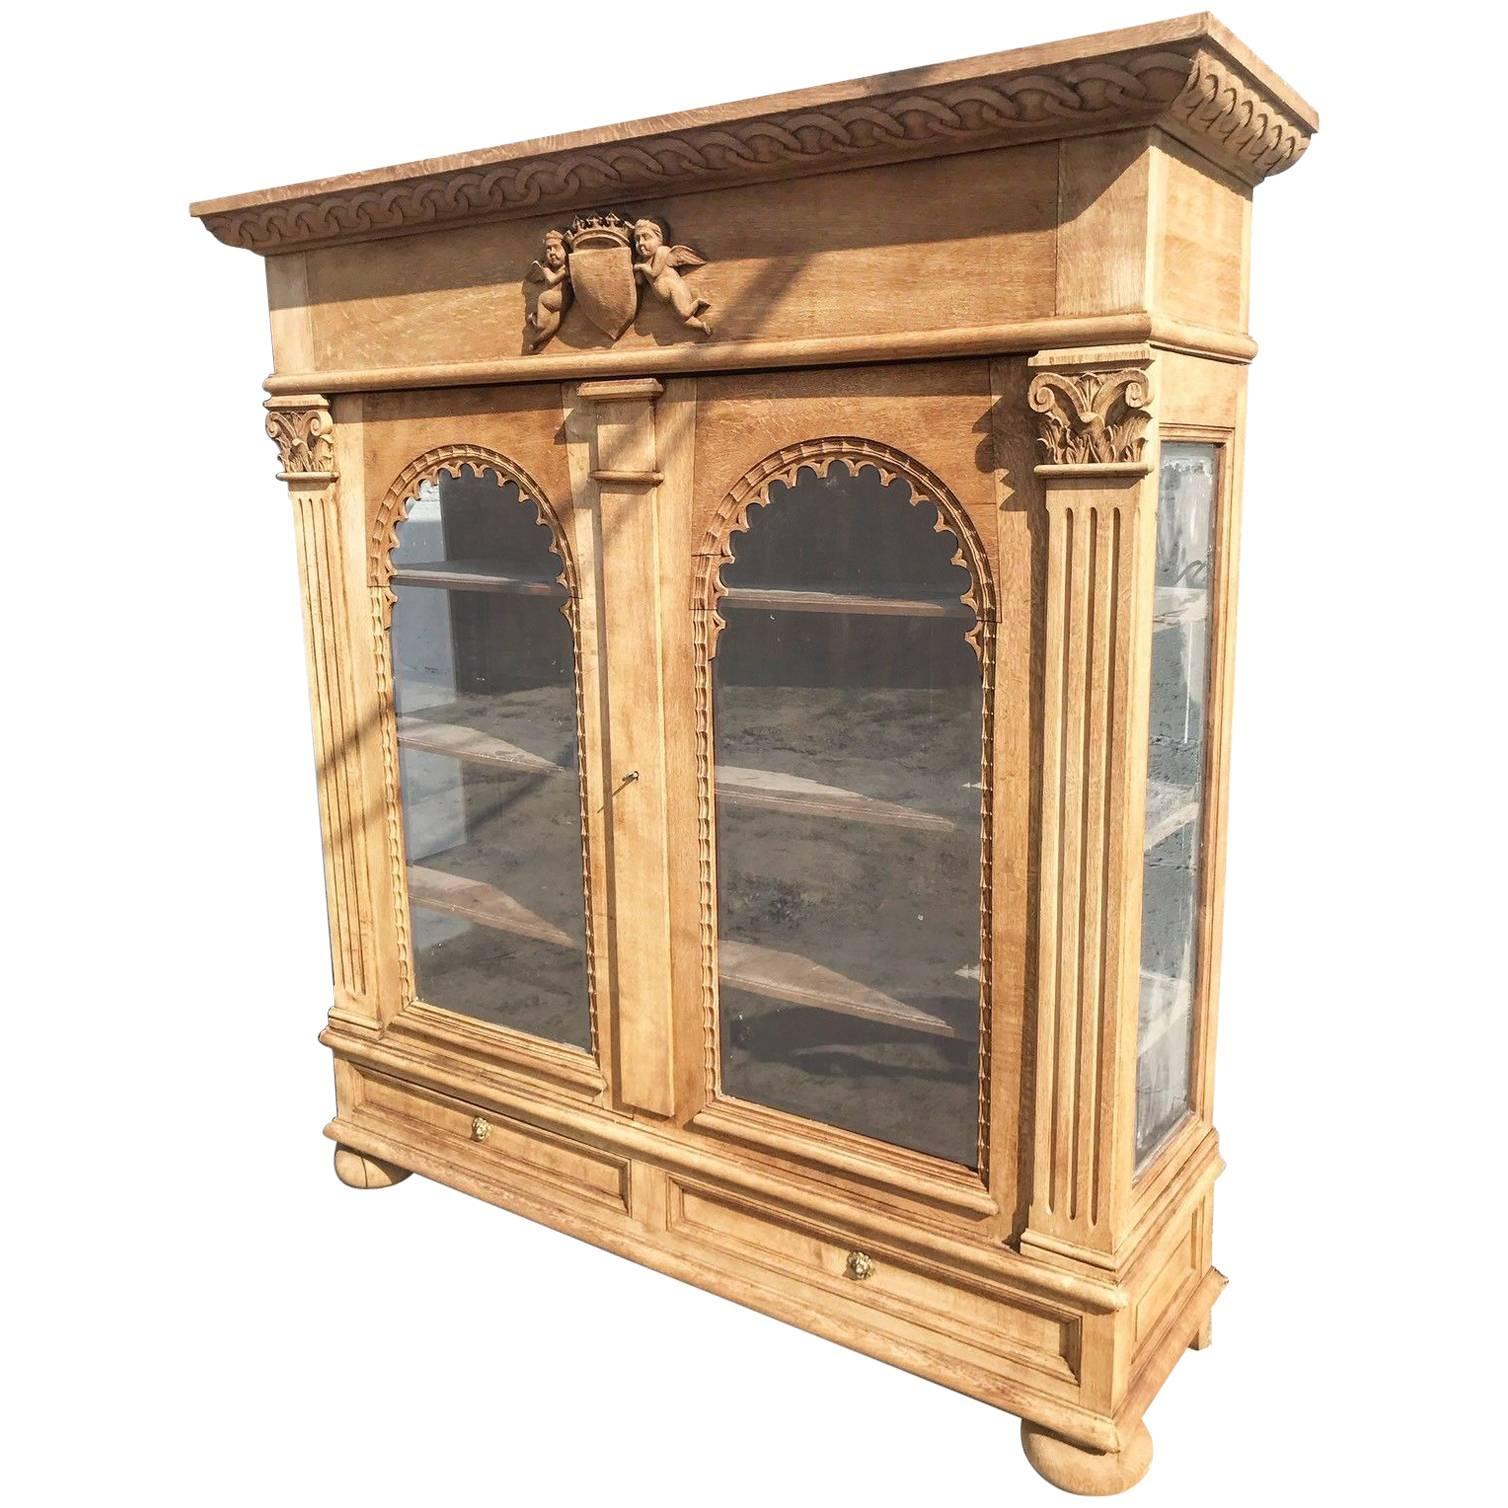 Super Rare 18th Century French Antique Armoire Cupboard Country Display Vintage For Sale